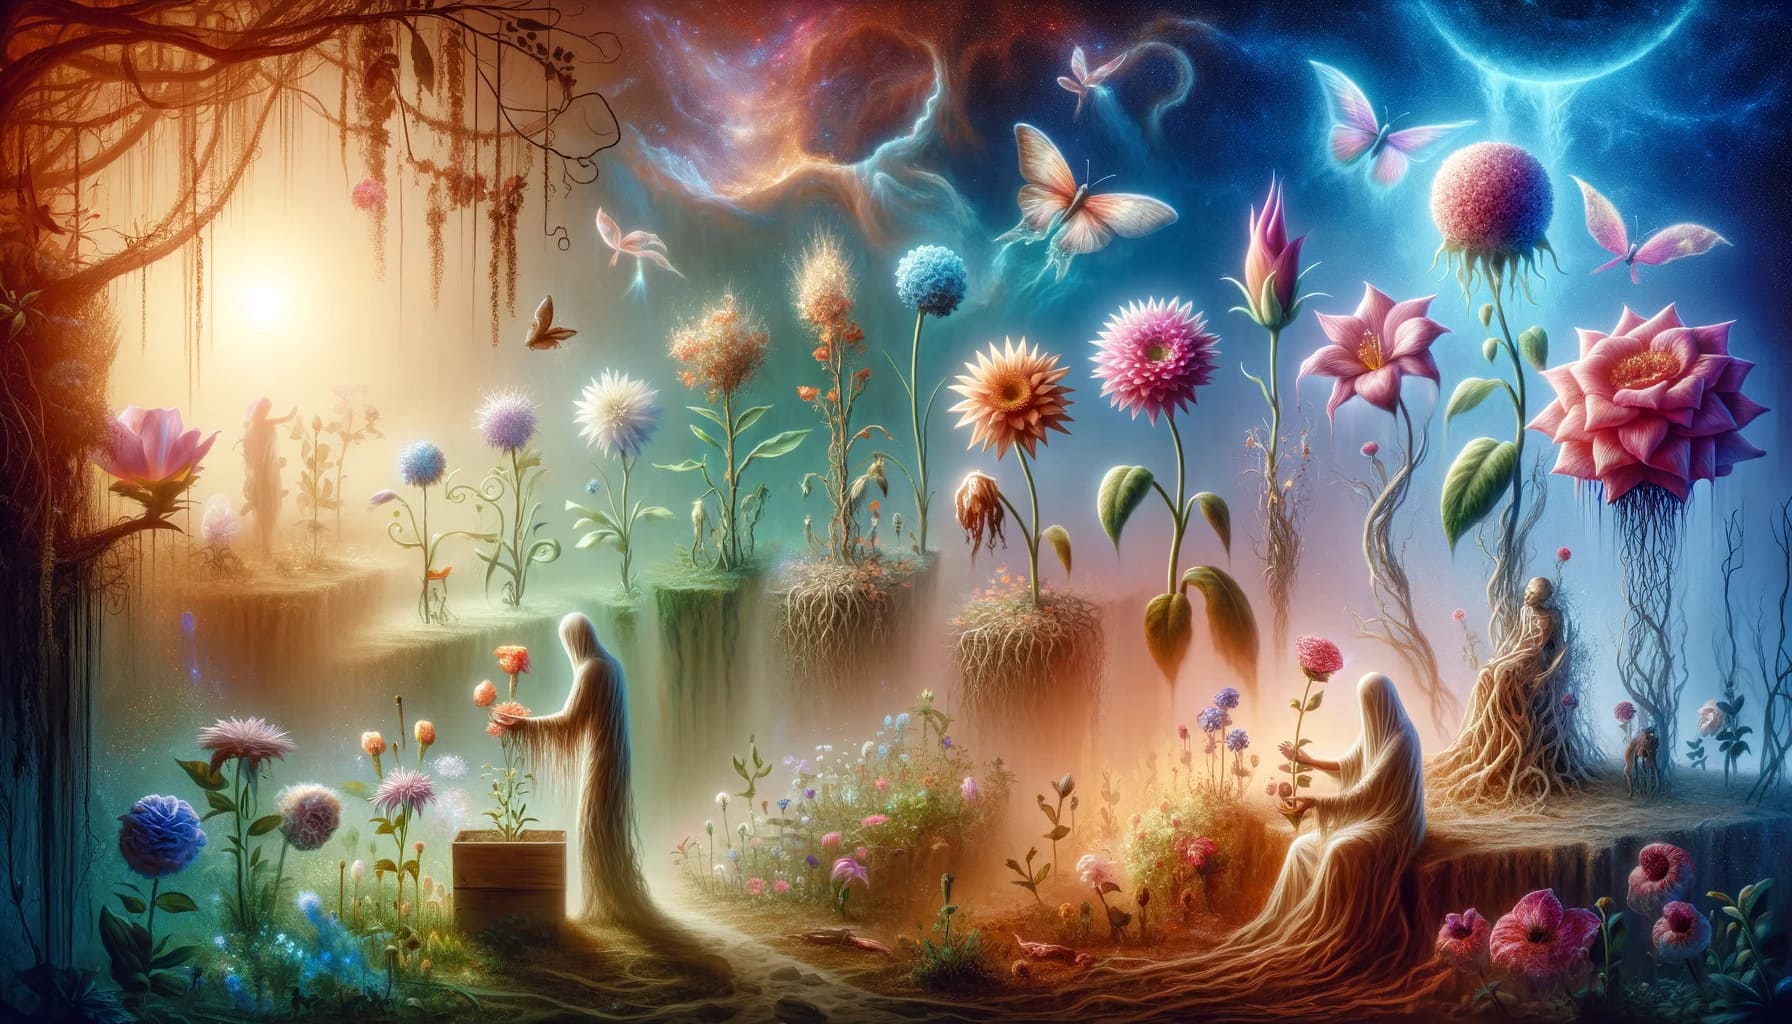 types of flowers in different conditions and interactions in a surreal ethereal landscape